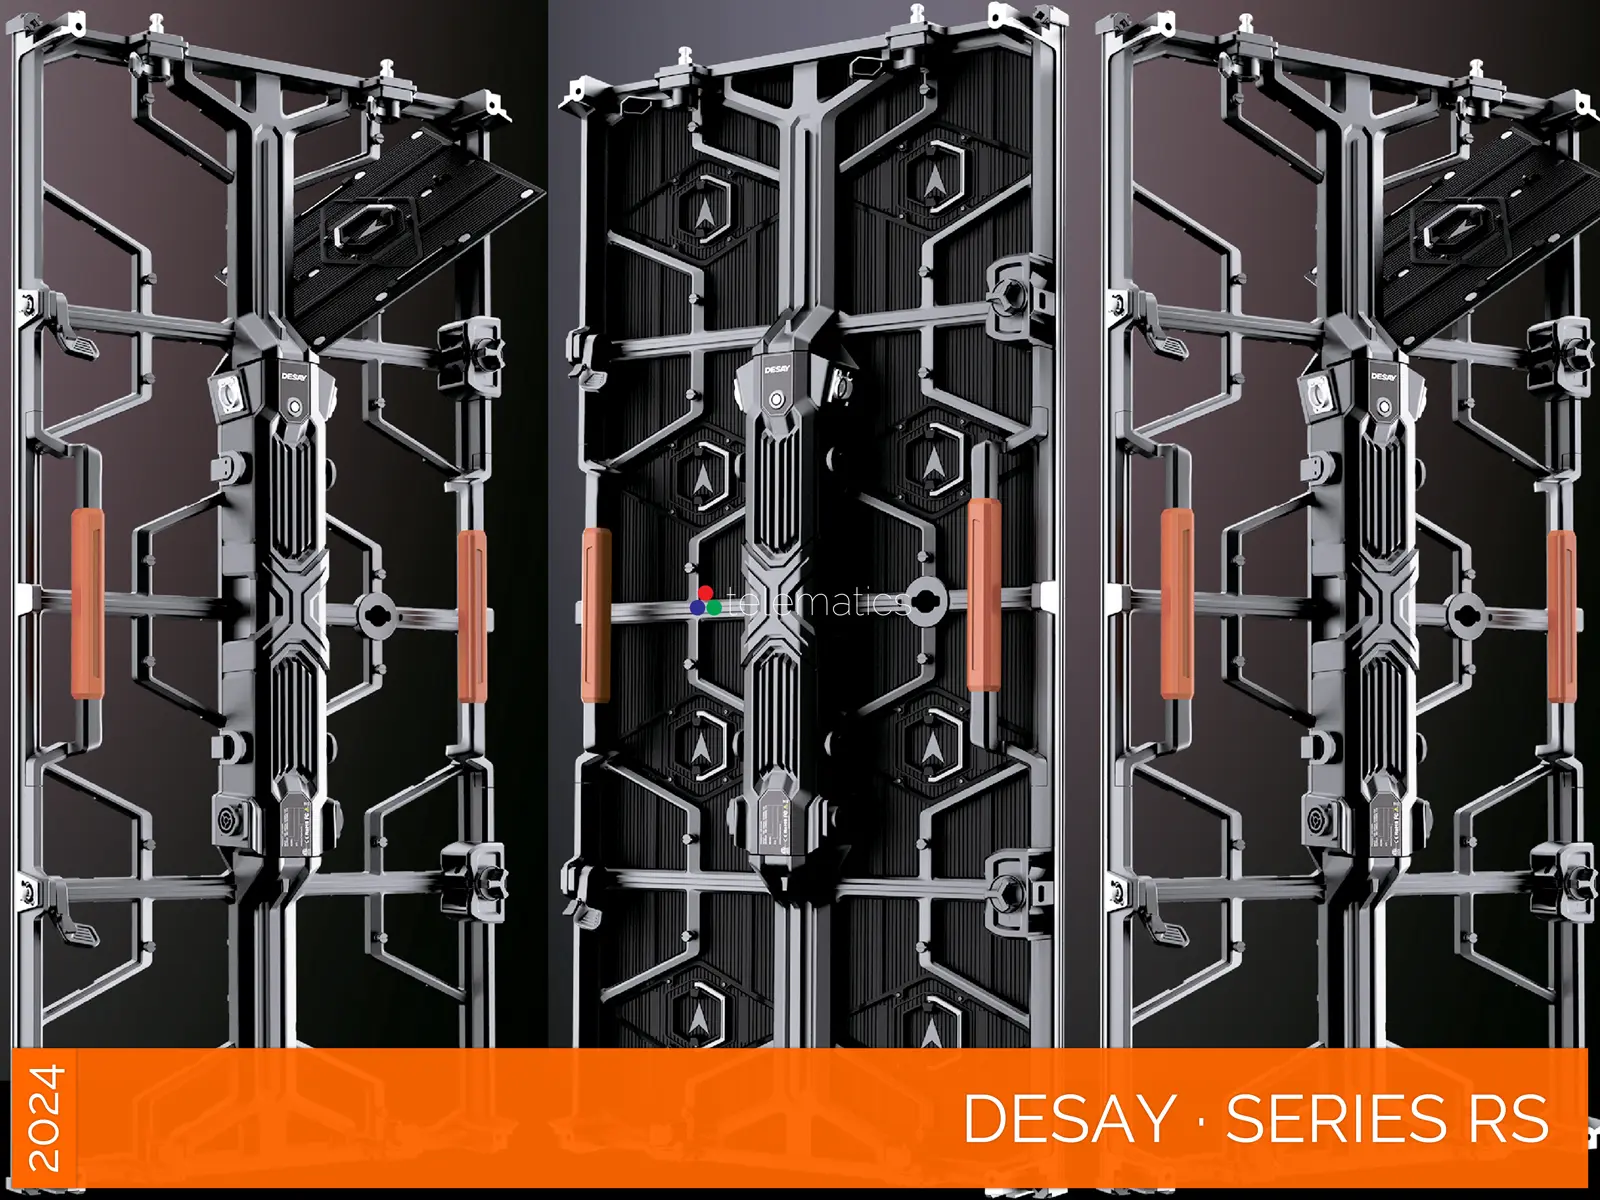 Desay · Series RS · Direct View LED Display Panel · Full Pixel Range · Rental Or Stage · Indoor Rated · Rapid Service And Setup · Robust Alignment Pins For Secure Installation · NovaStar COEX MX CX · Vision Management Platform · Viplex · review · price · cost · priced from $1,790 per square meter